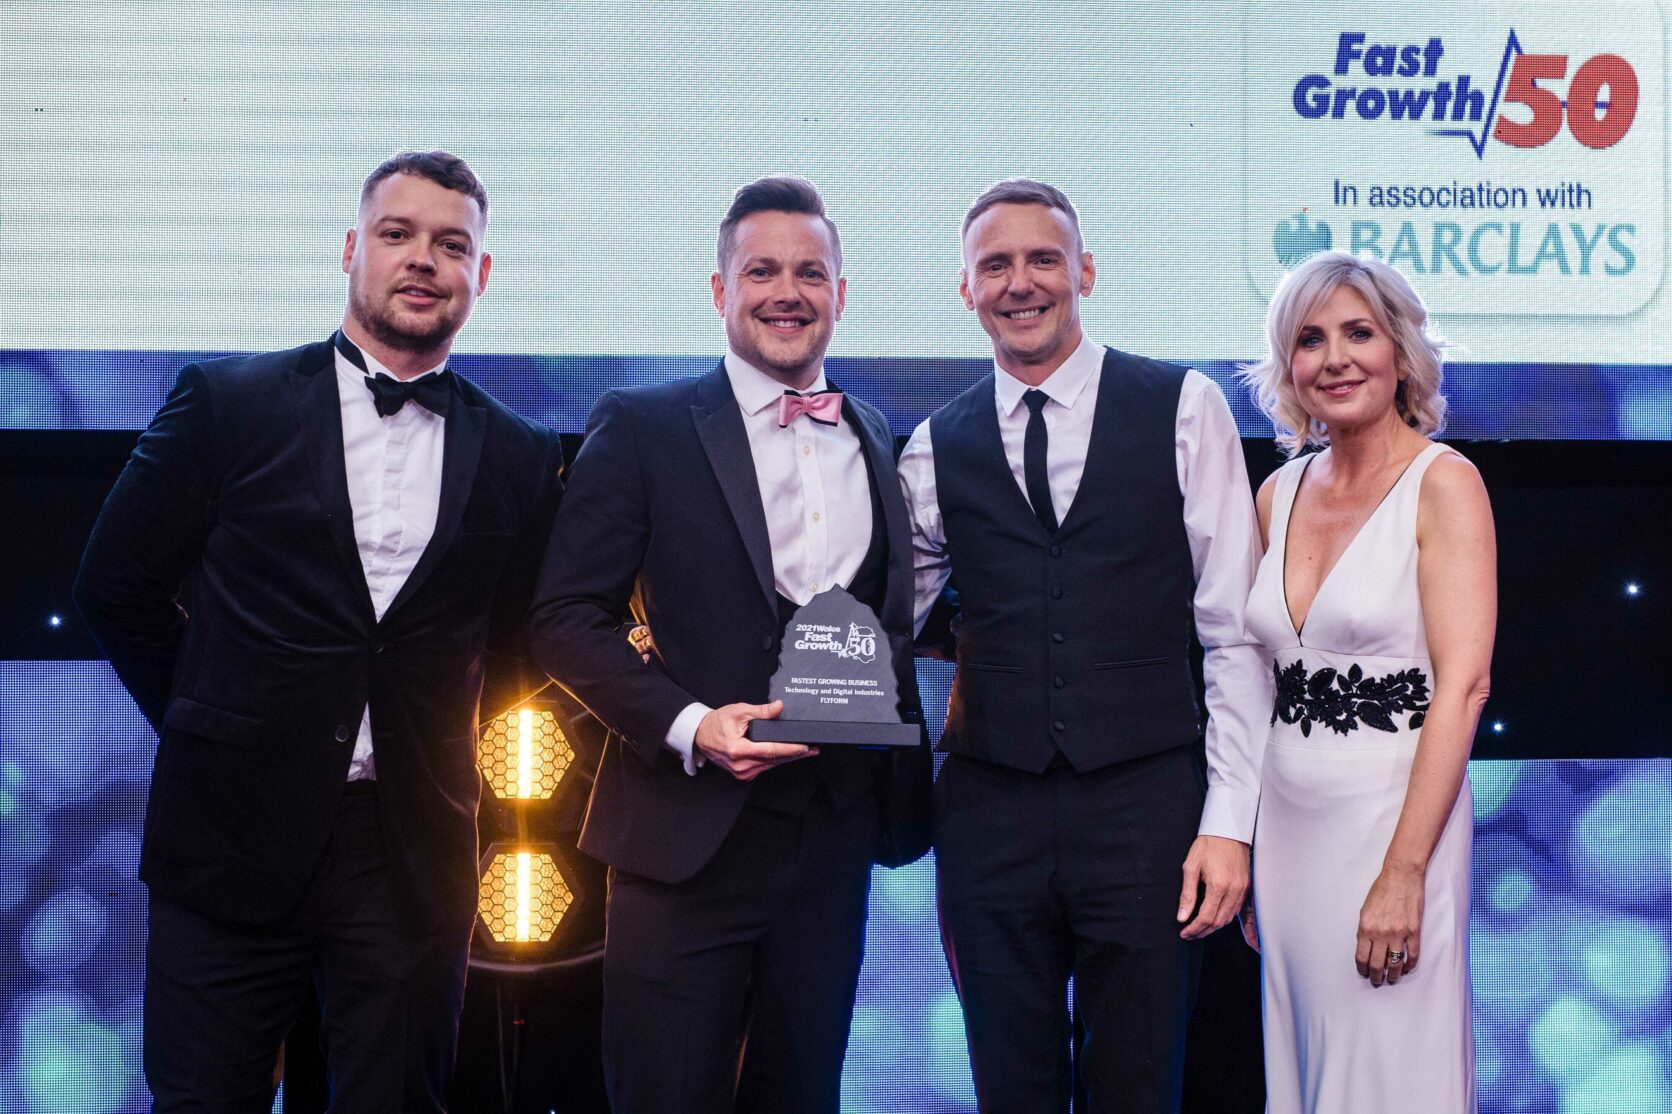 Phil Davies and Arron Davies accept the award for Fastest Growing Technology & Digital Business